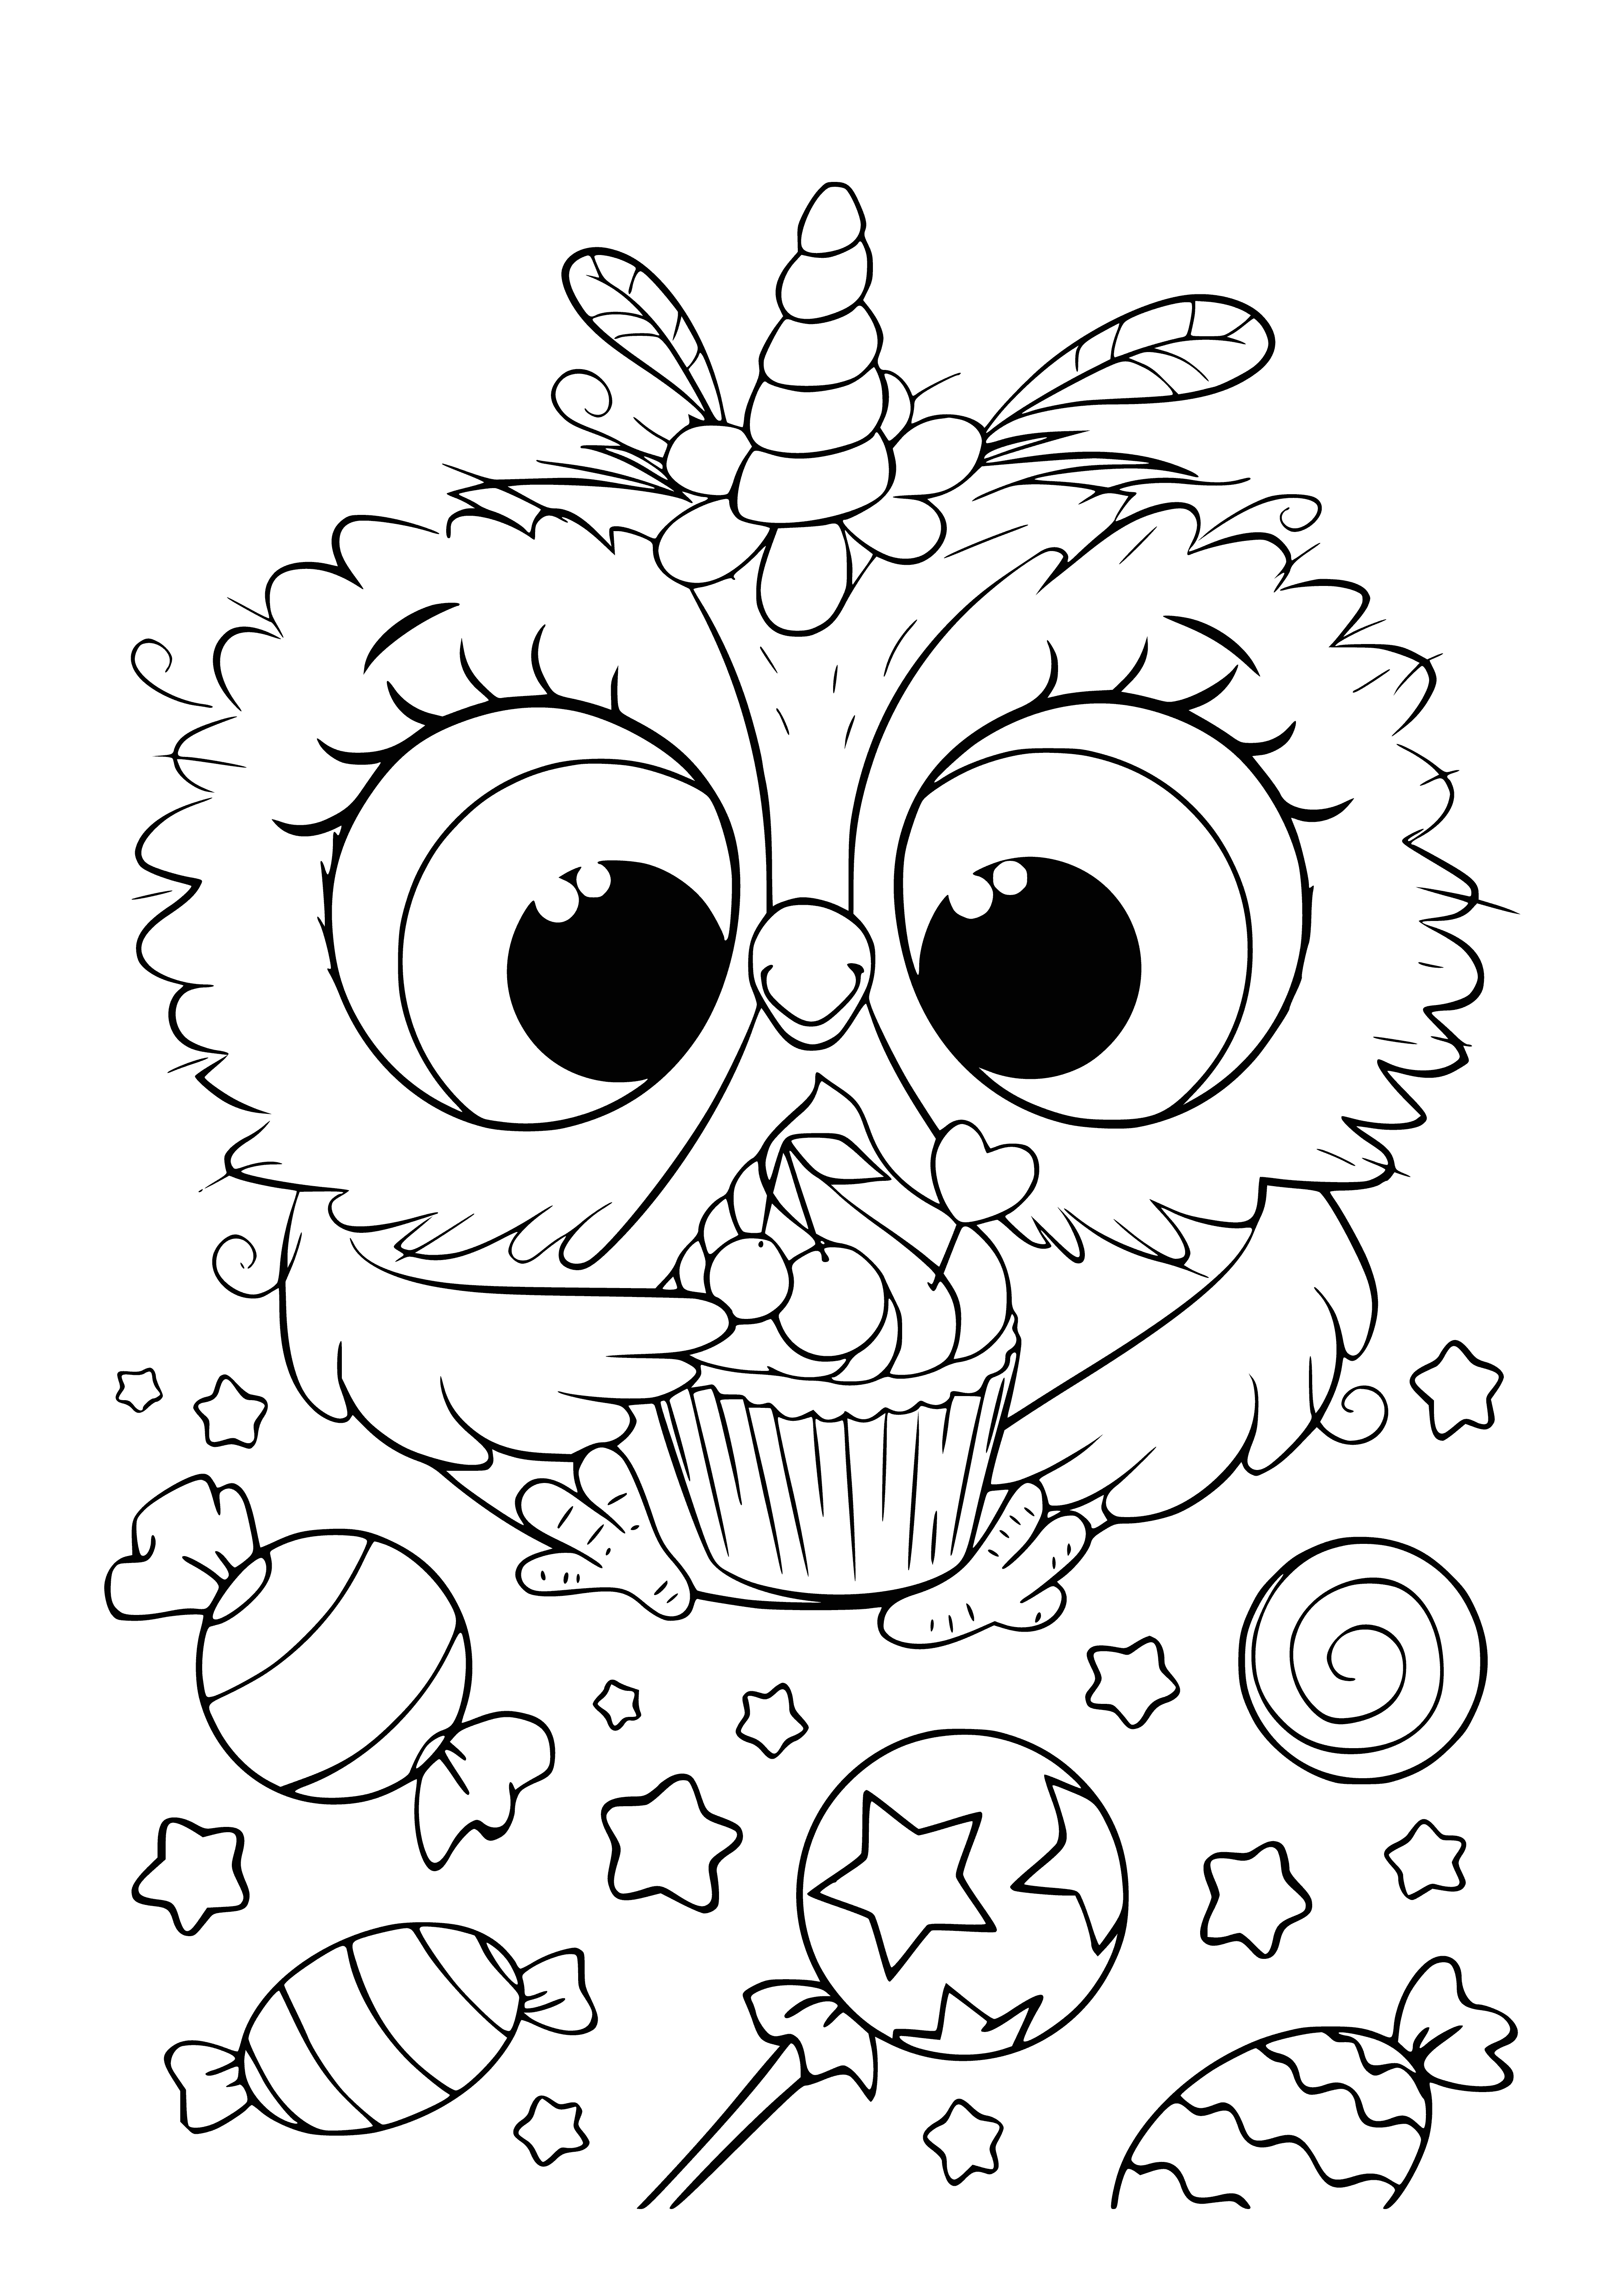 coloring page: Cute owlet sits on a branch with plate of yummy cupcakes, macarons, hearts & stars-all drawn for coloring fun!